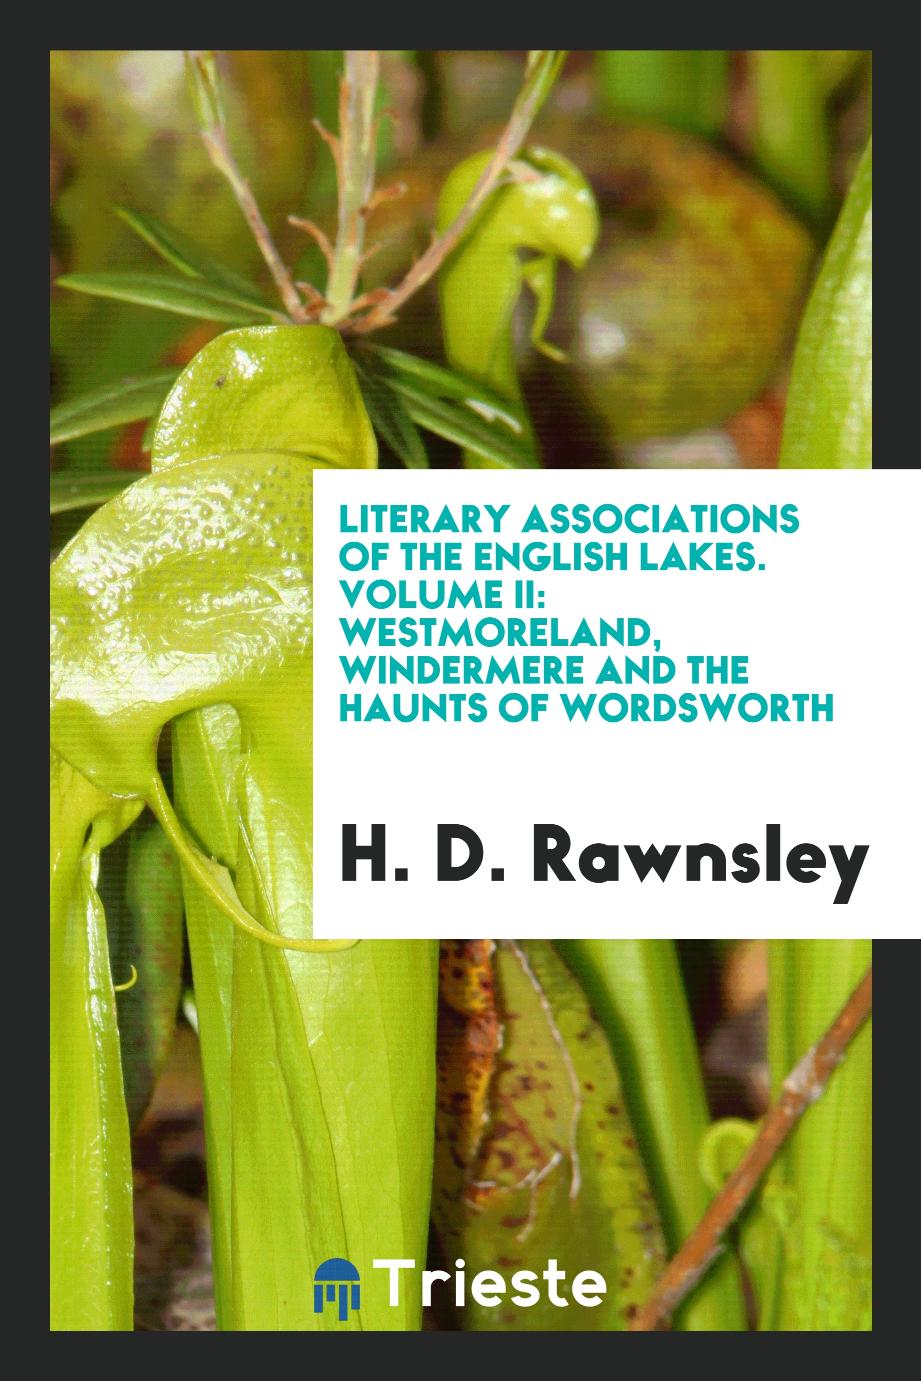 Literary associations of the English lakes. Volume II: Westmoreland, Windermere and the Haunts of Wordsworth